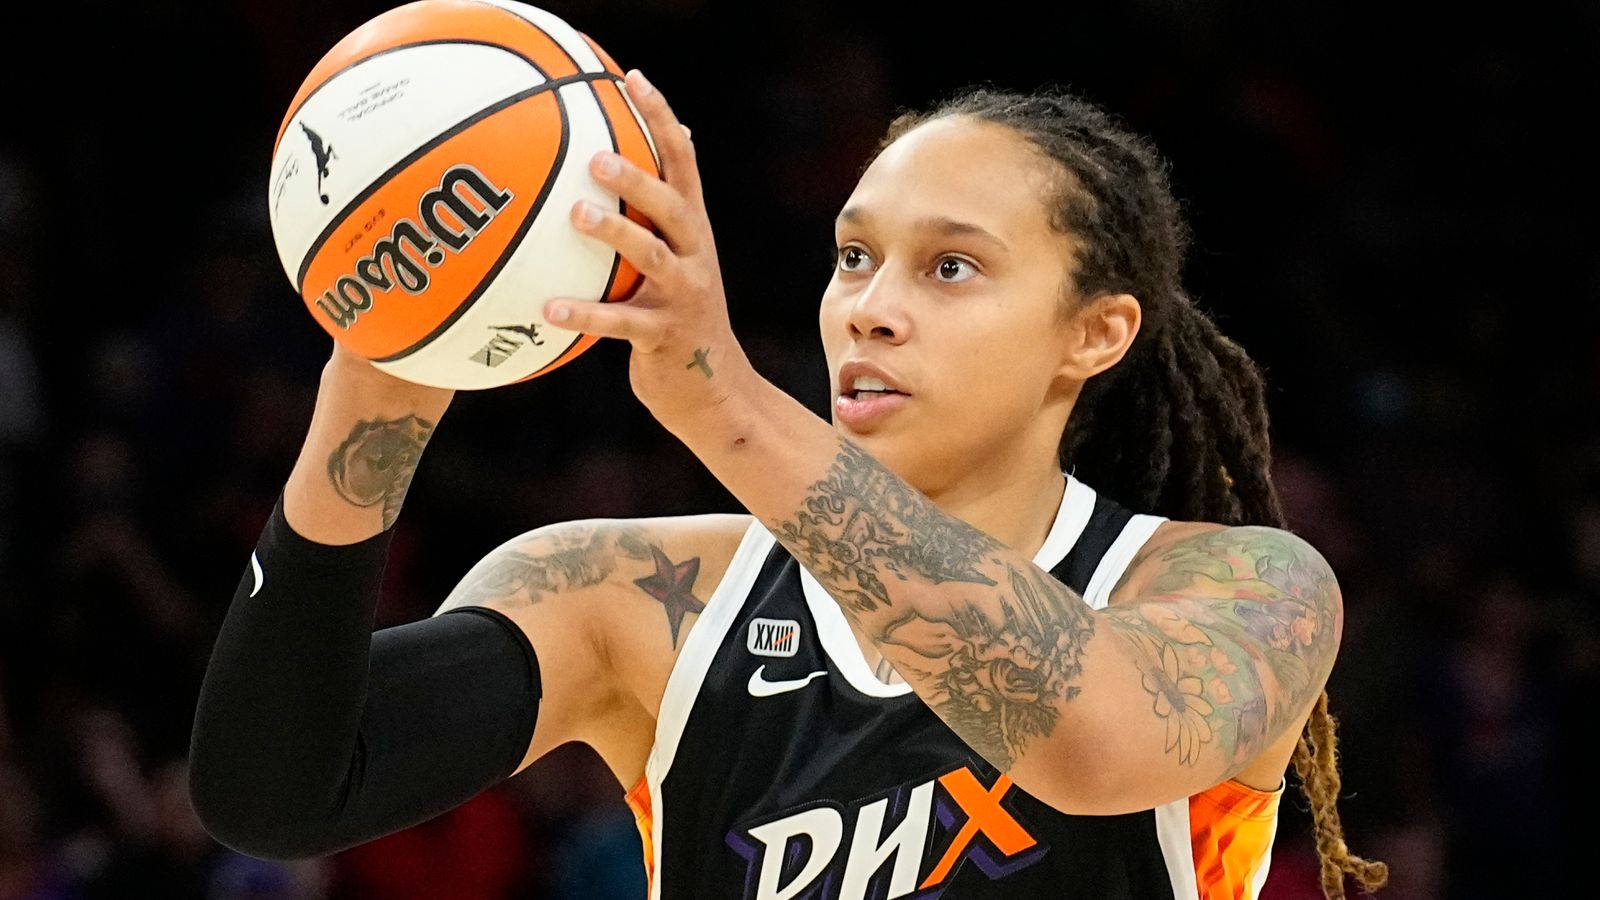 USA basketballer Brittney Griner goes on trial in Russia on drugs charges four months after arrest | Basketball News